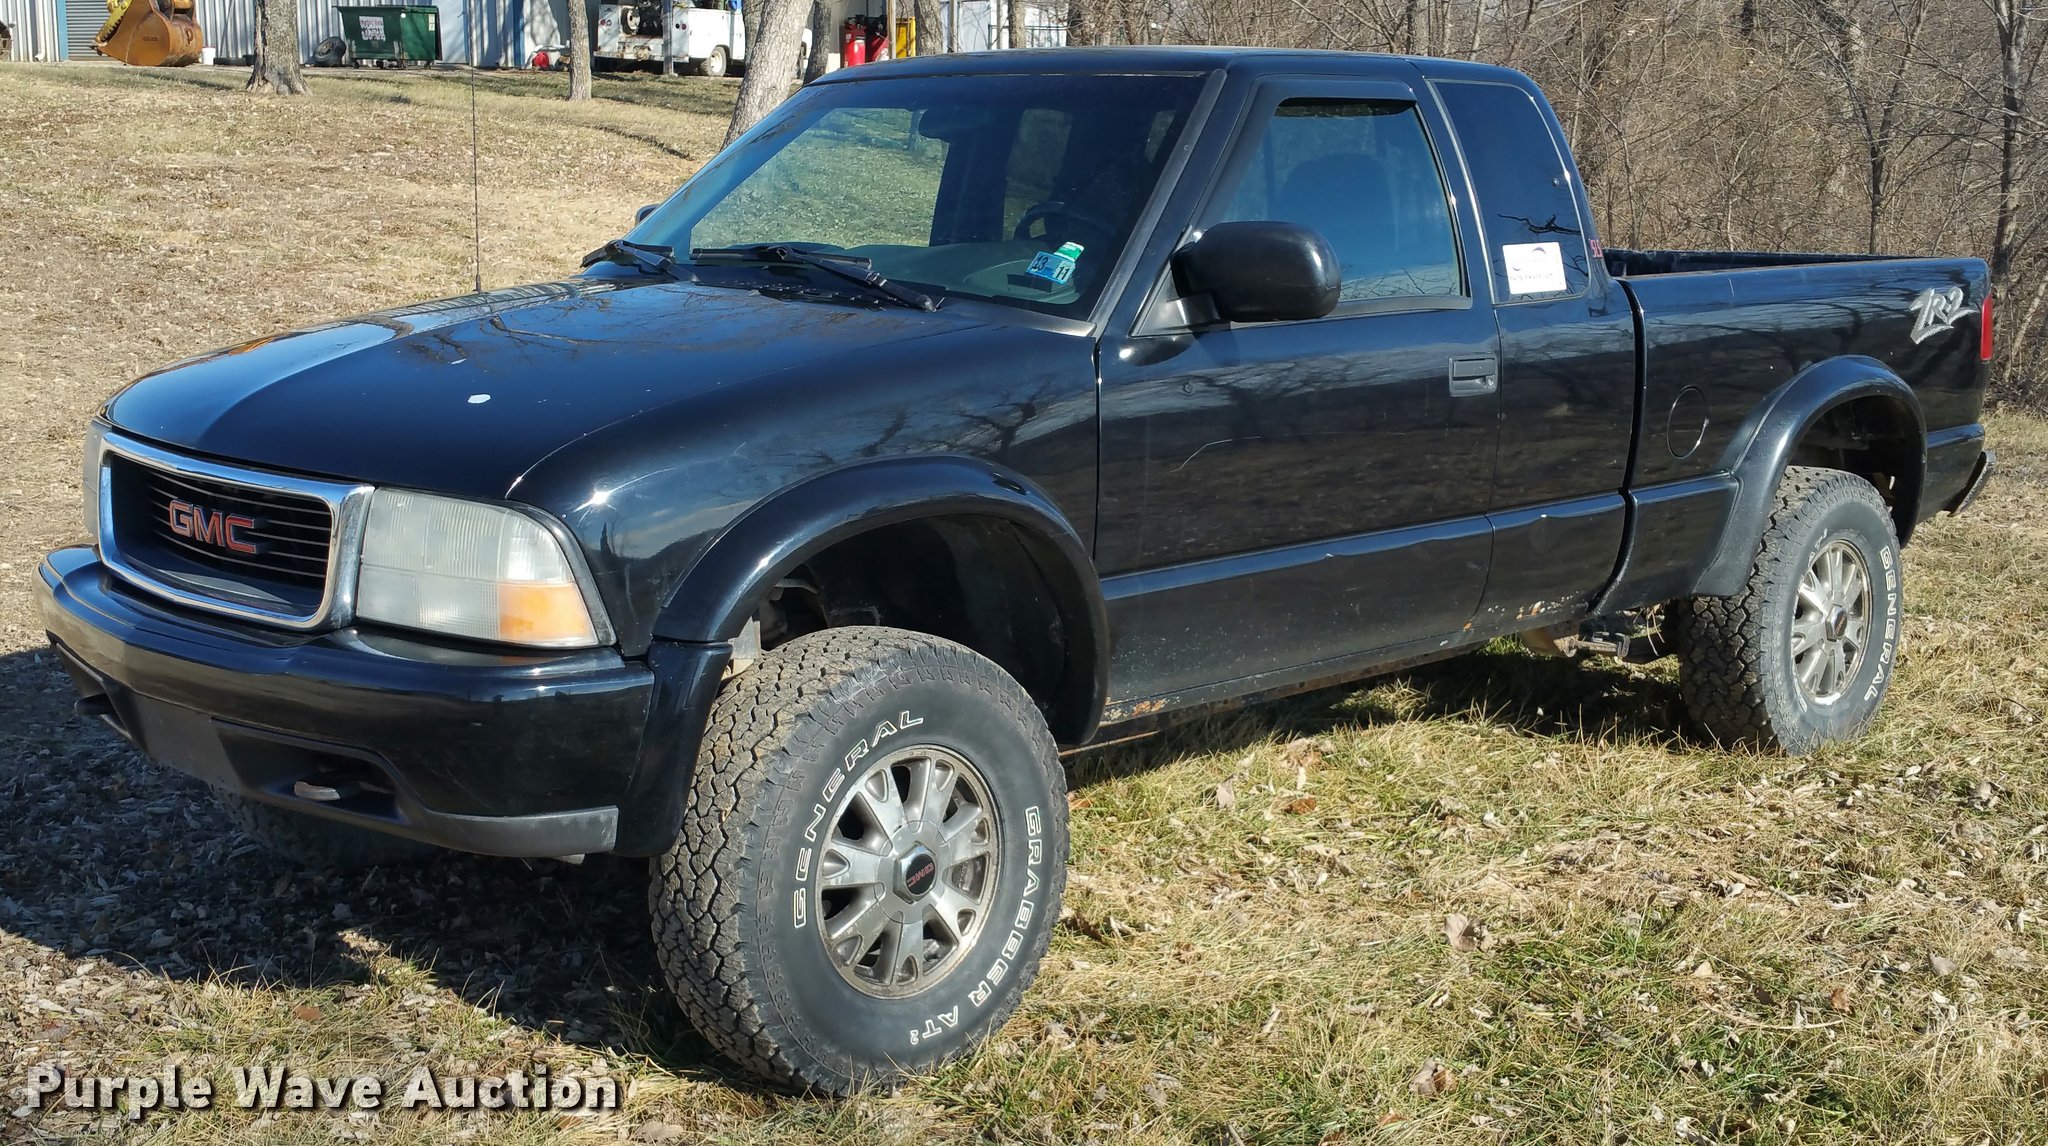 2002 GMC Sonoma Ext. Cab pickup truck in Holden, MO | Item L4668 sold |  Purple Wave